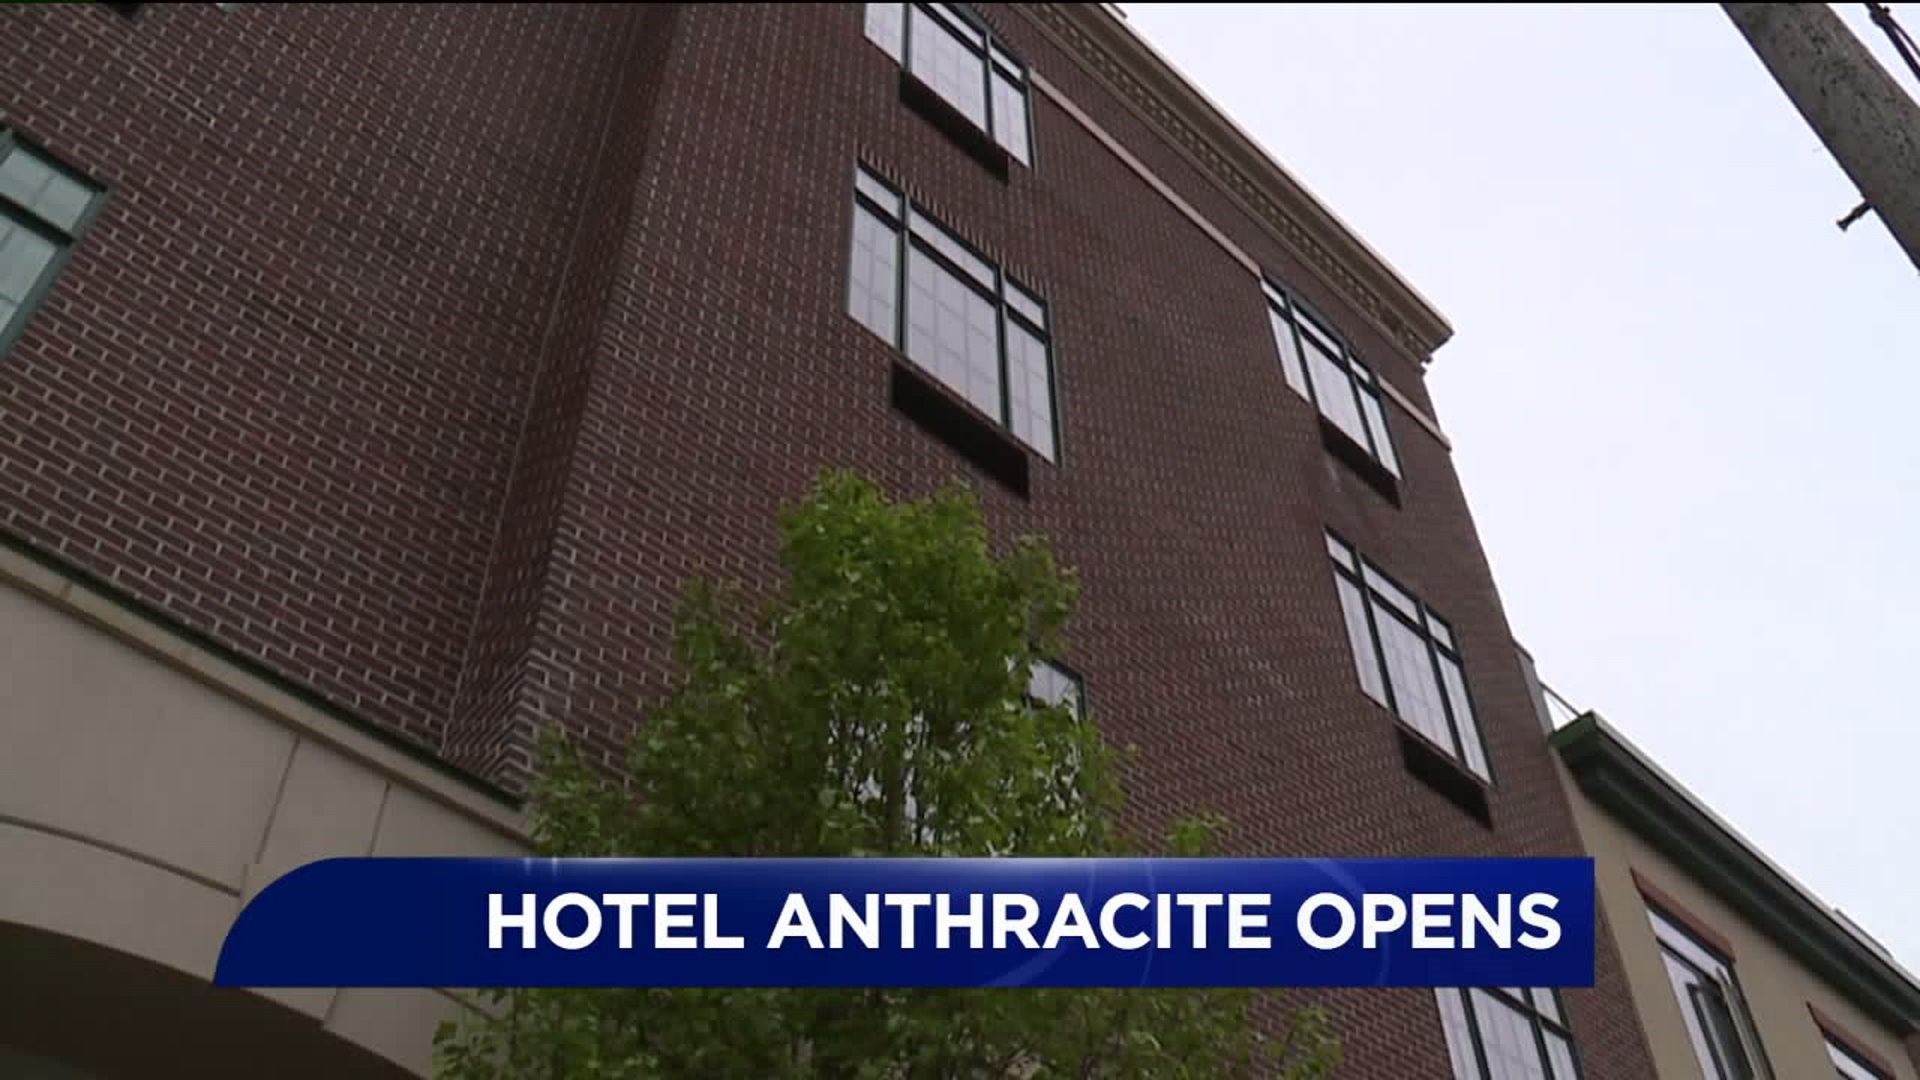 Hotel Anthracite Now Open in Carbondale